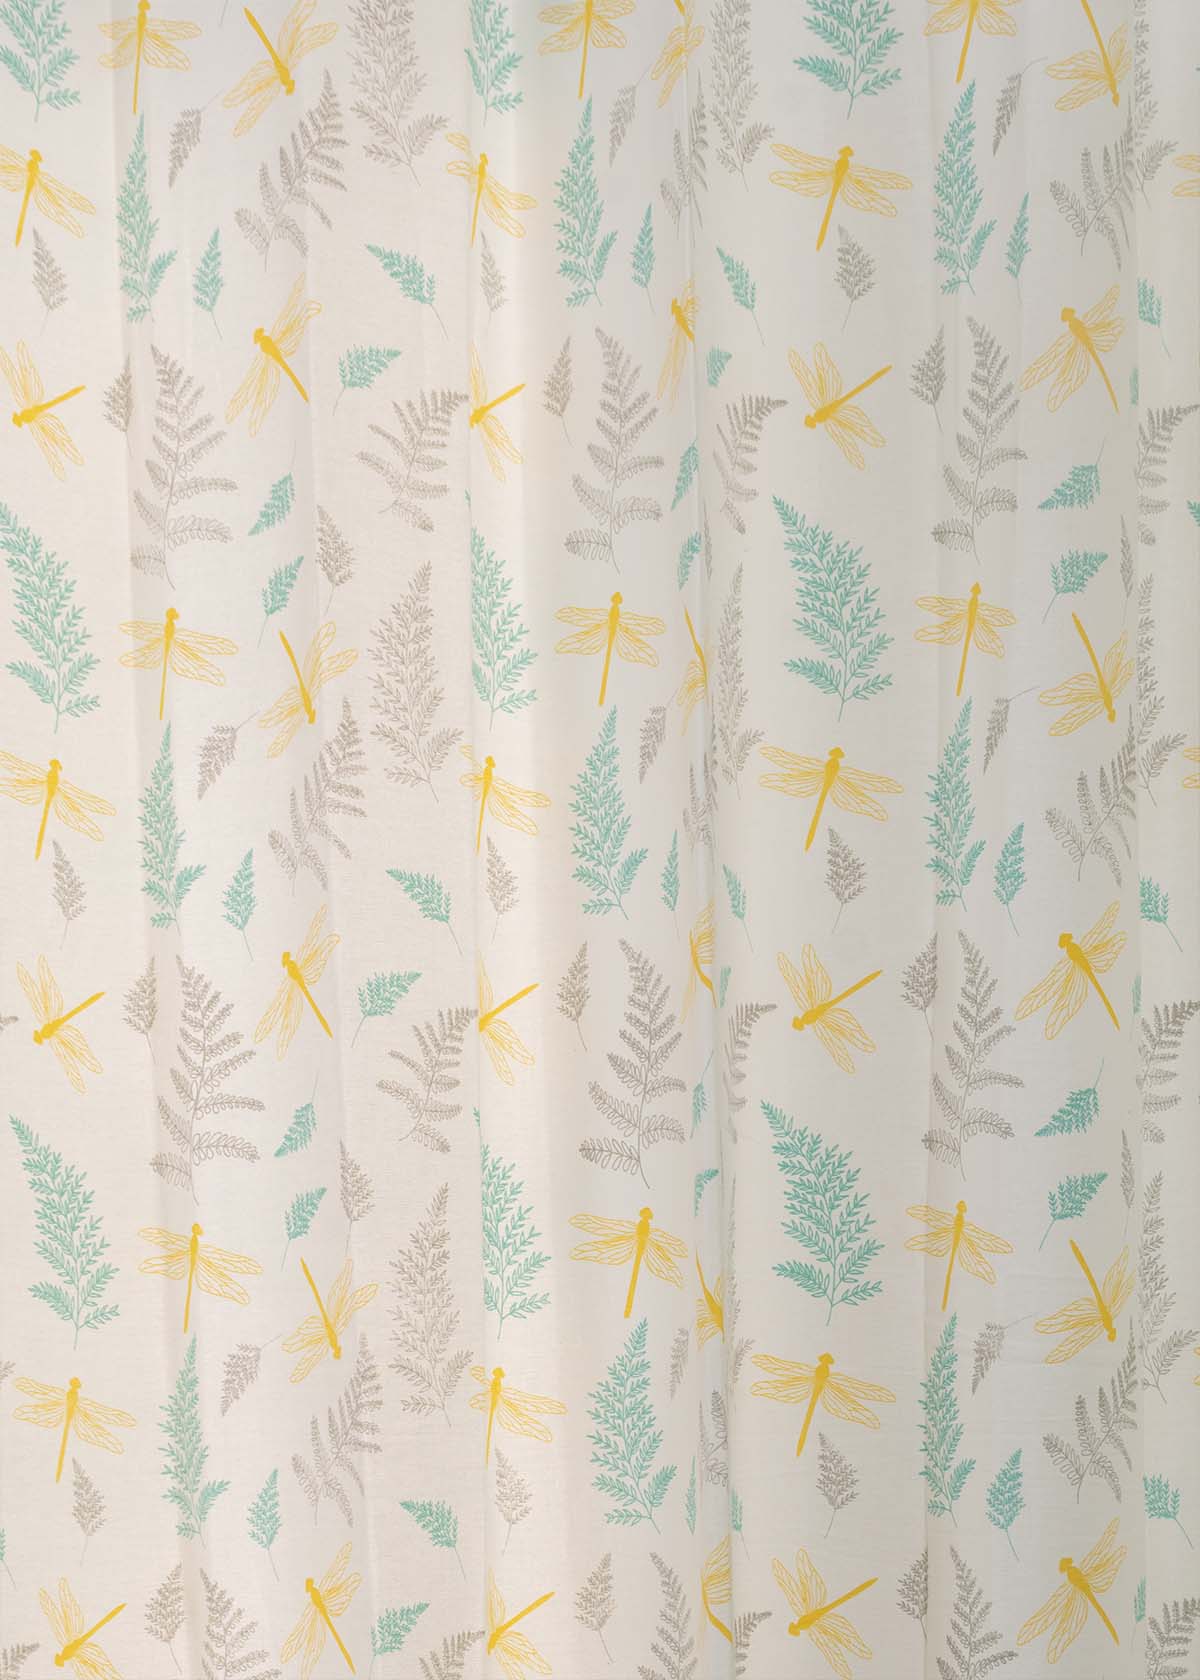 Winged Skies printed cotton Fabric - Yellow